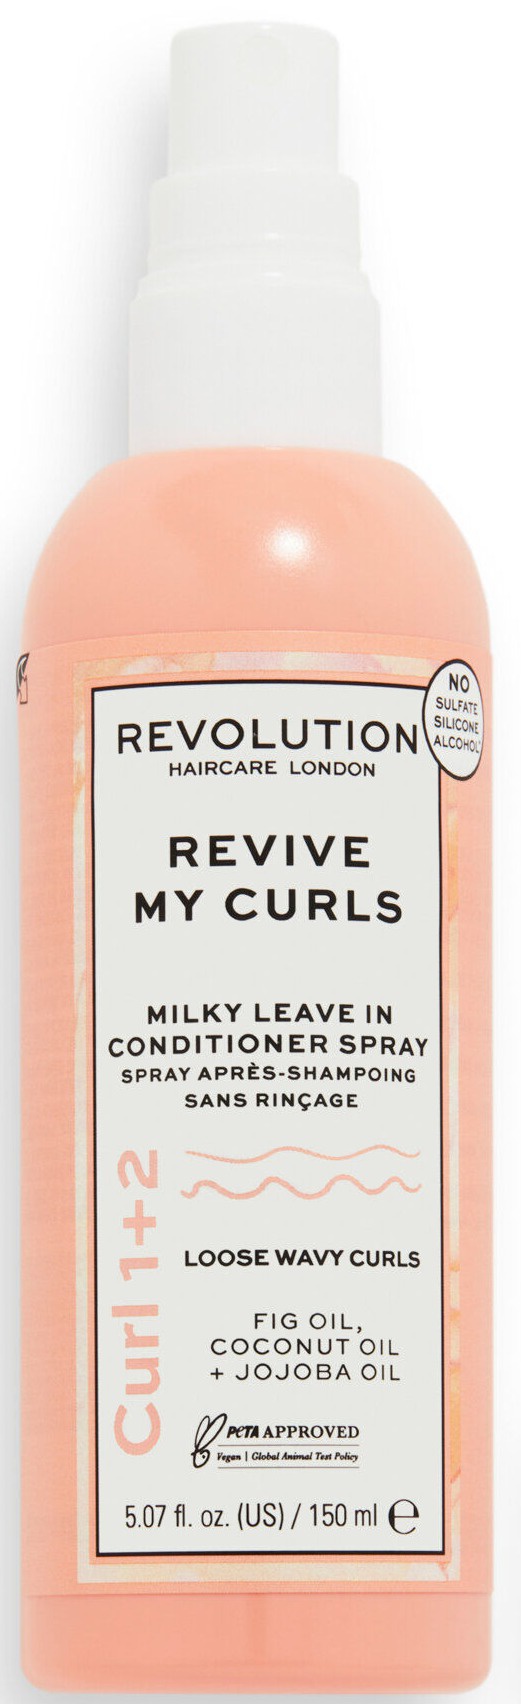 Revolution Haircare Revive My Curls Milky Leave In Conditioner Spray